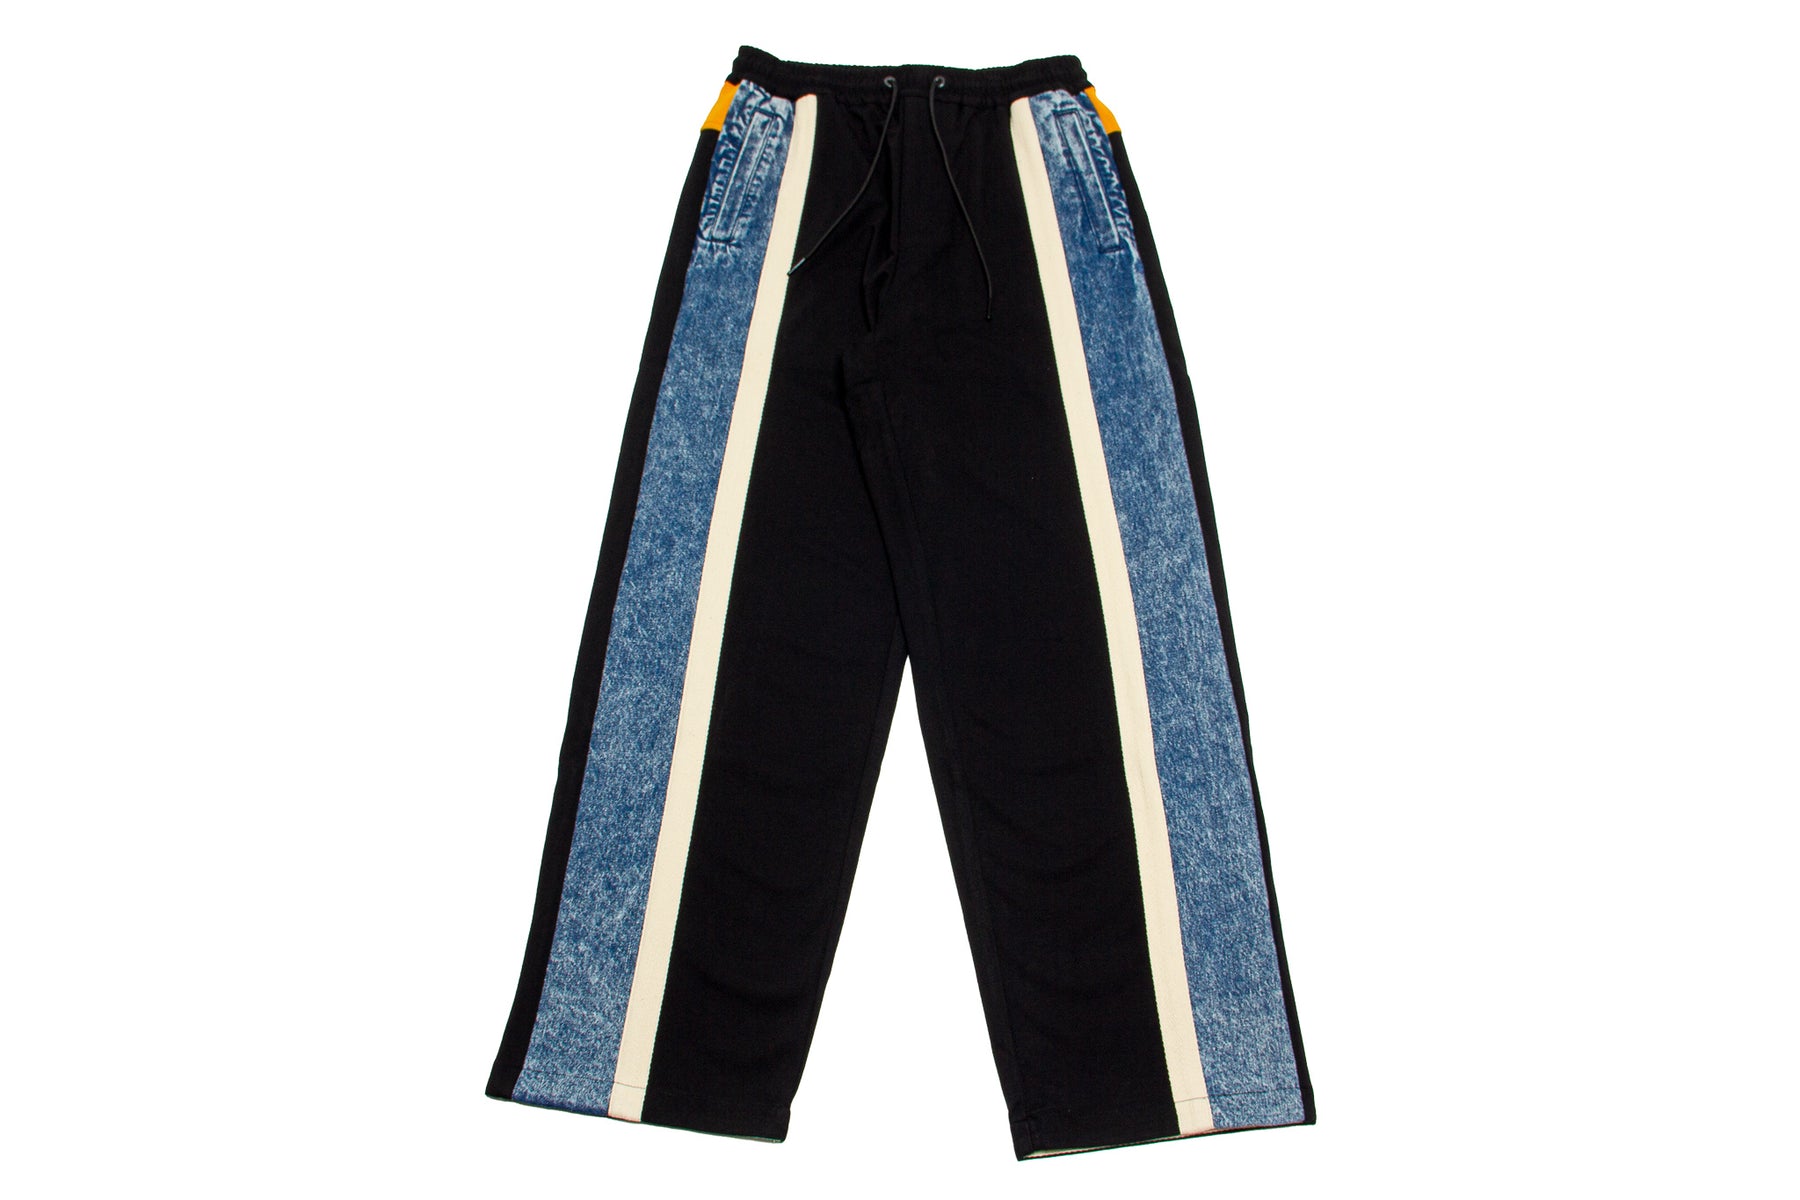 AlphaStyle Chase Track Pants "Black"